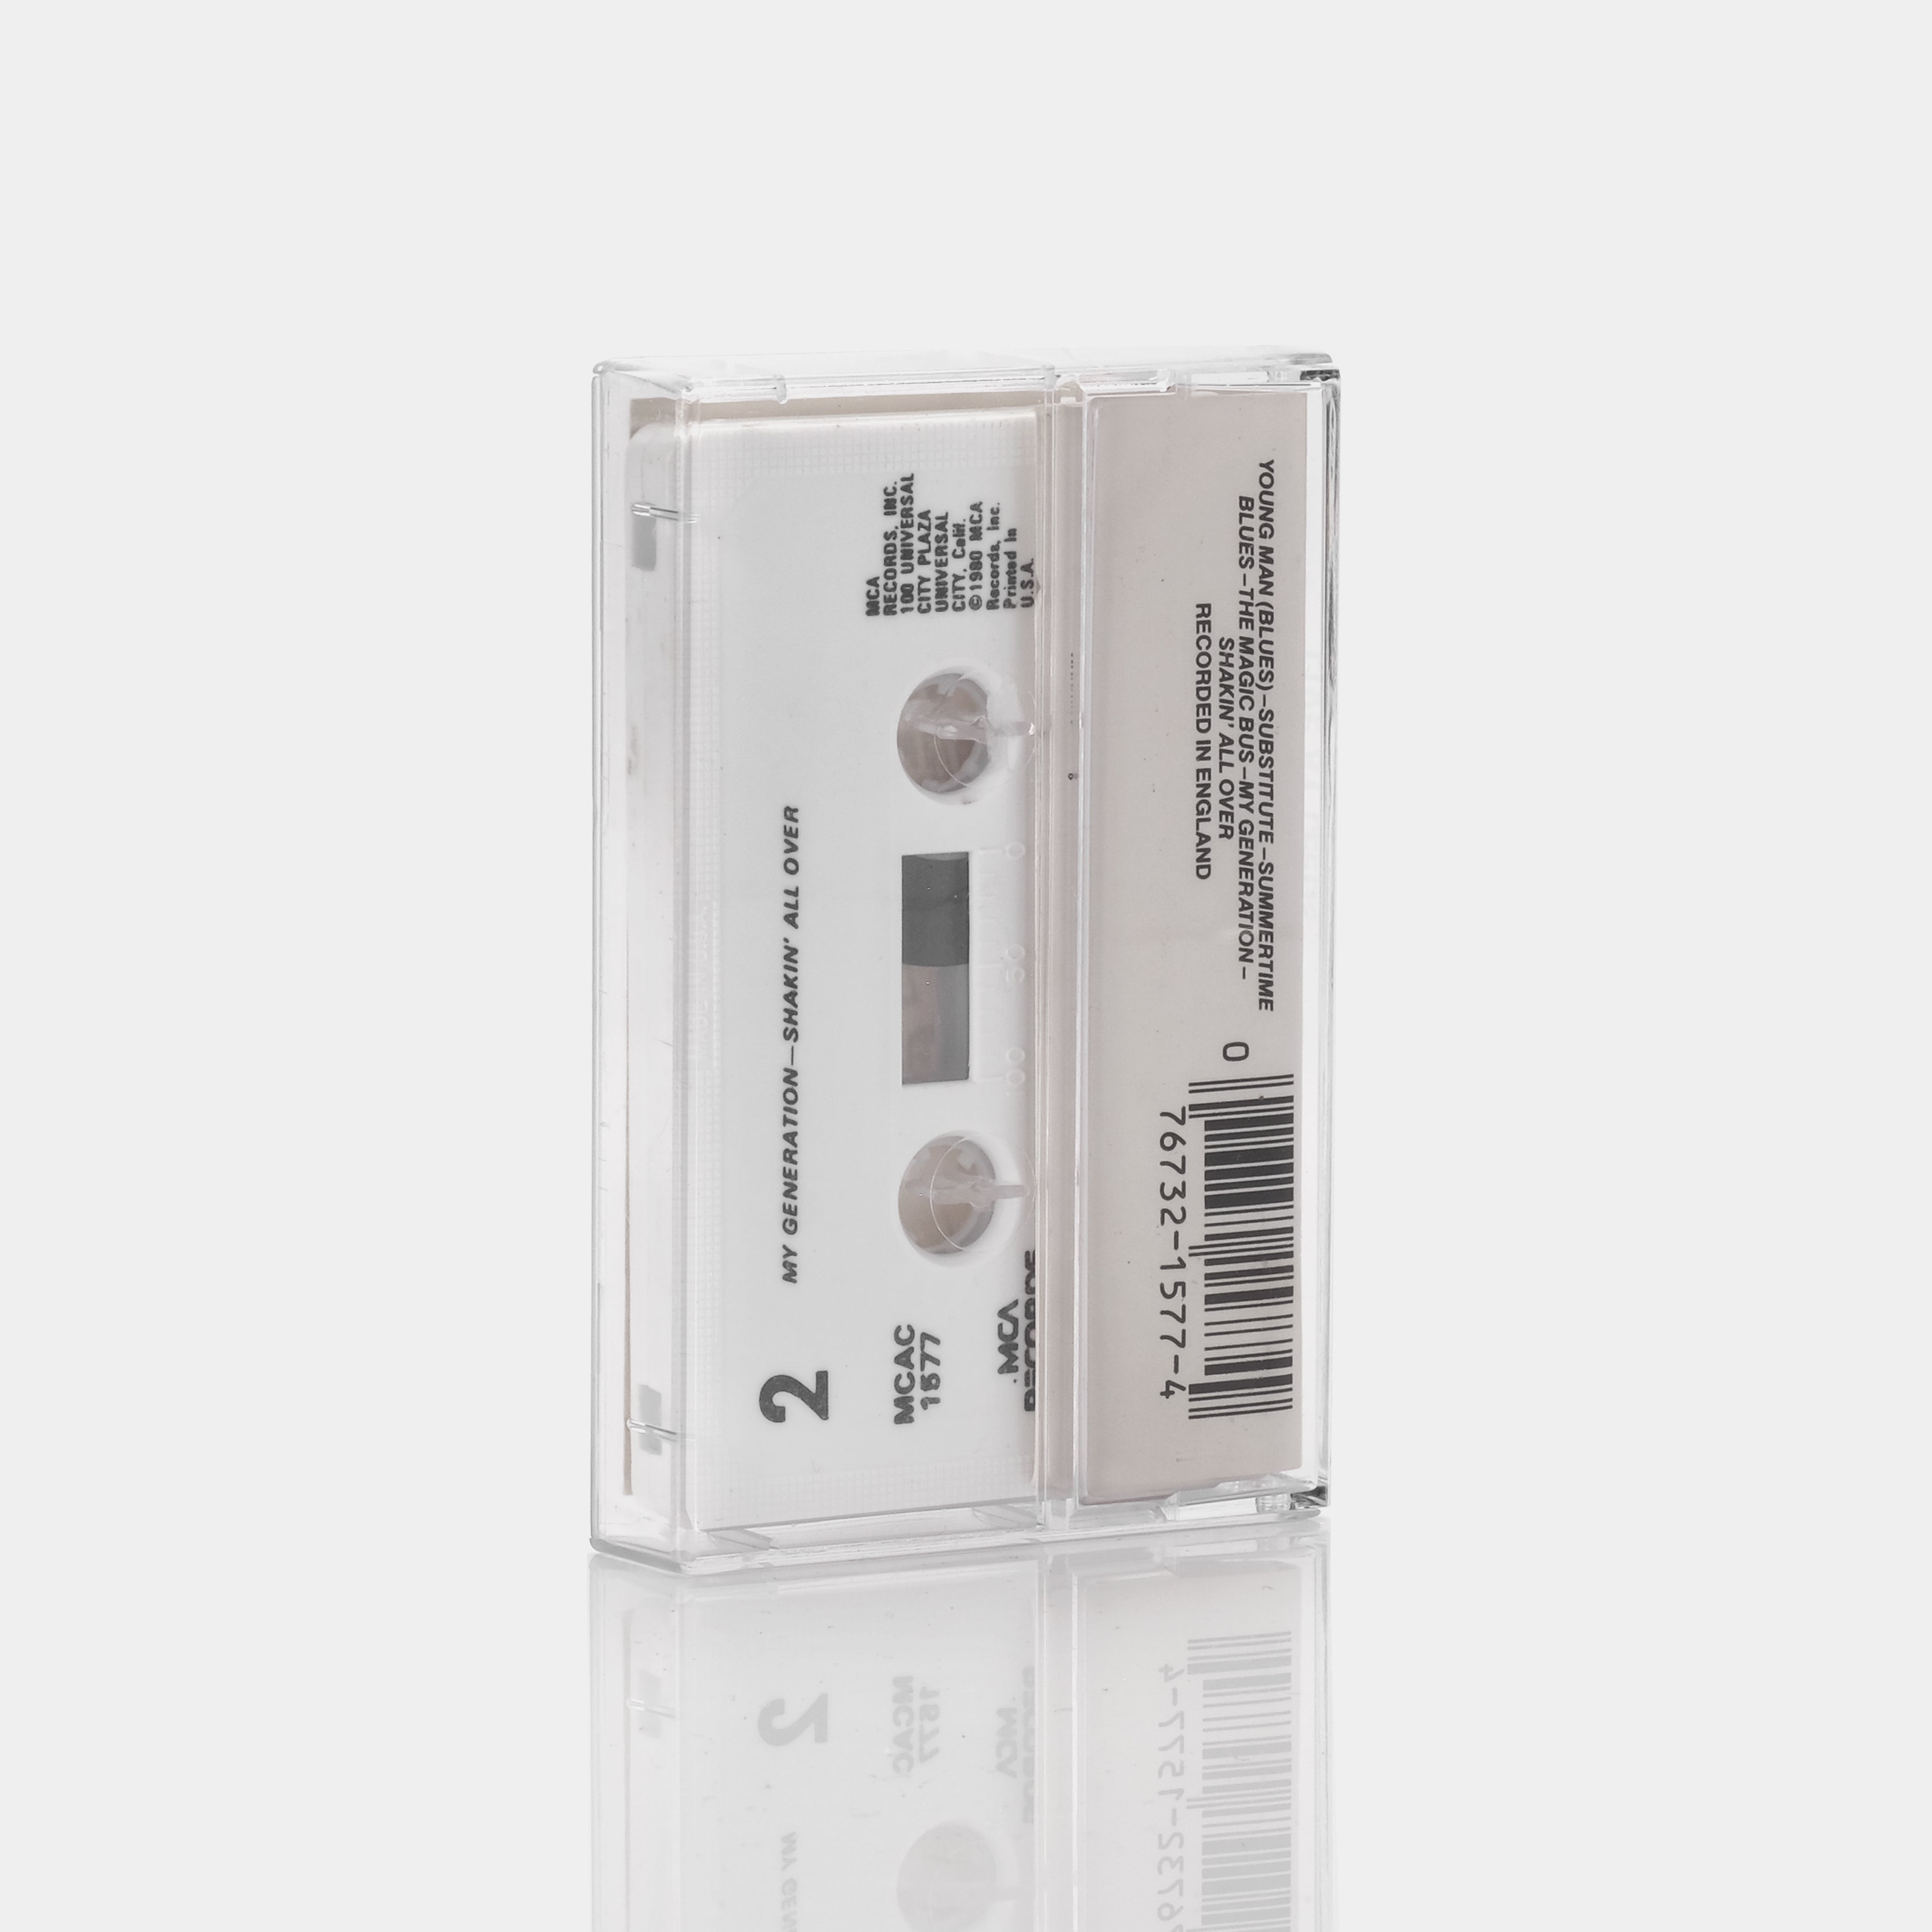 The Who - Live At Leeds Cassette Tape